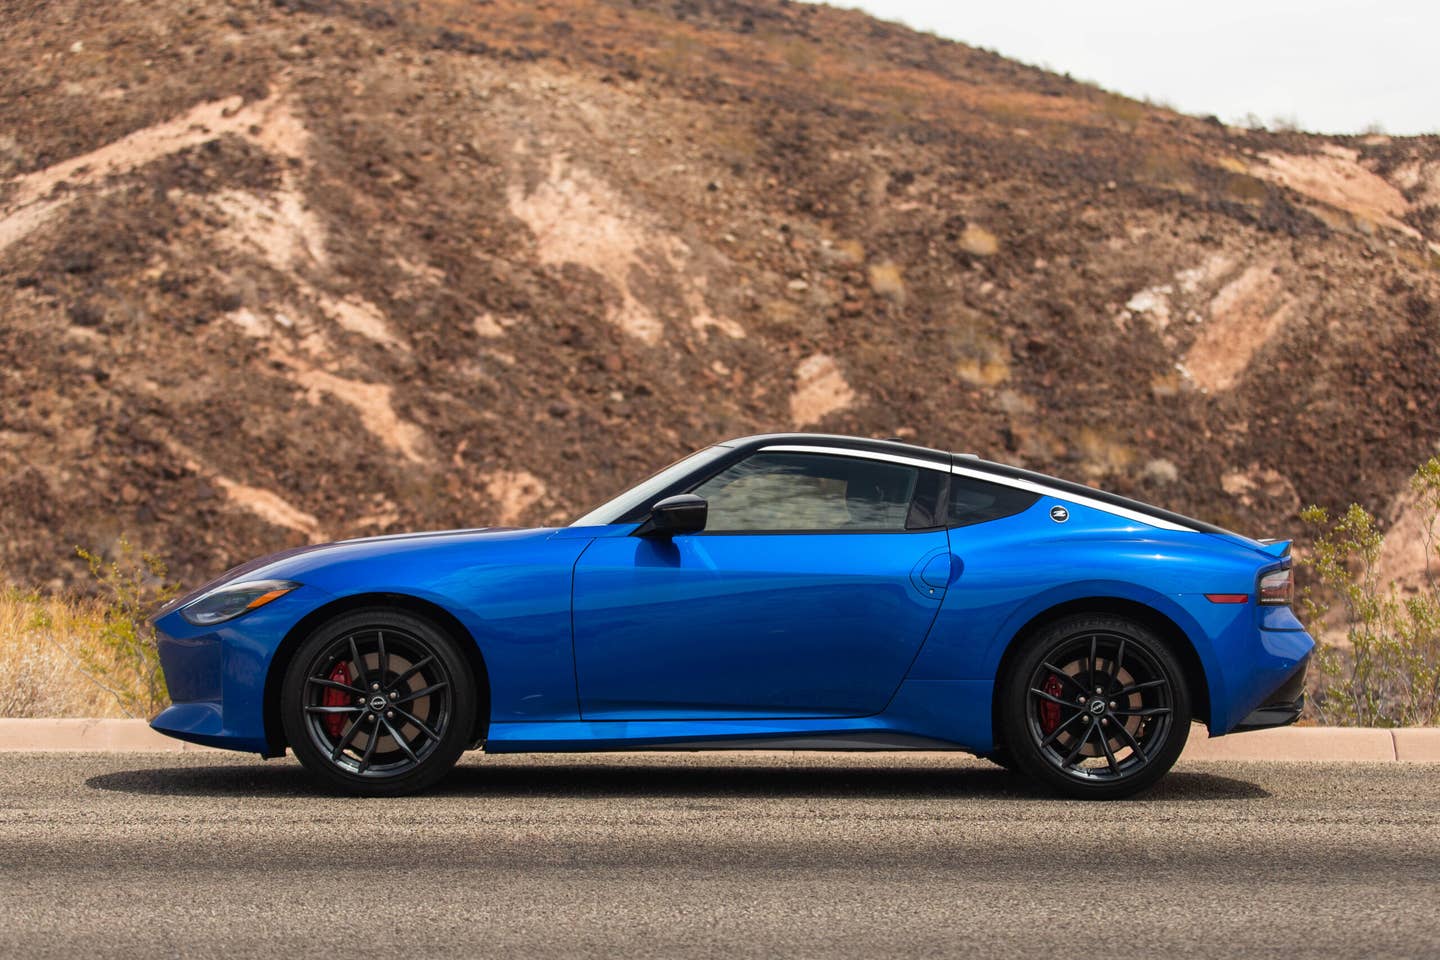 The new Z in Performance trim. MSRP of this test car came to $53,210.